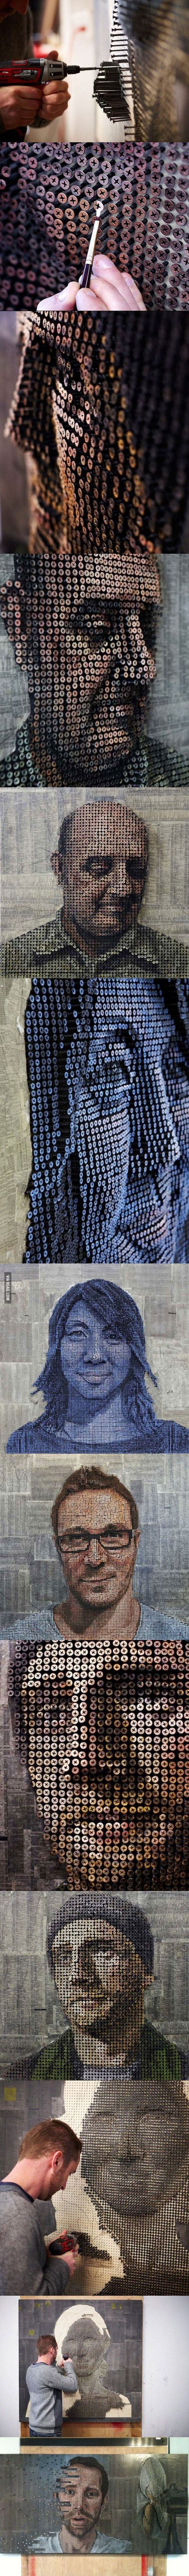 artist uses screws and paint to create portraits